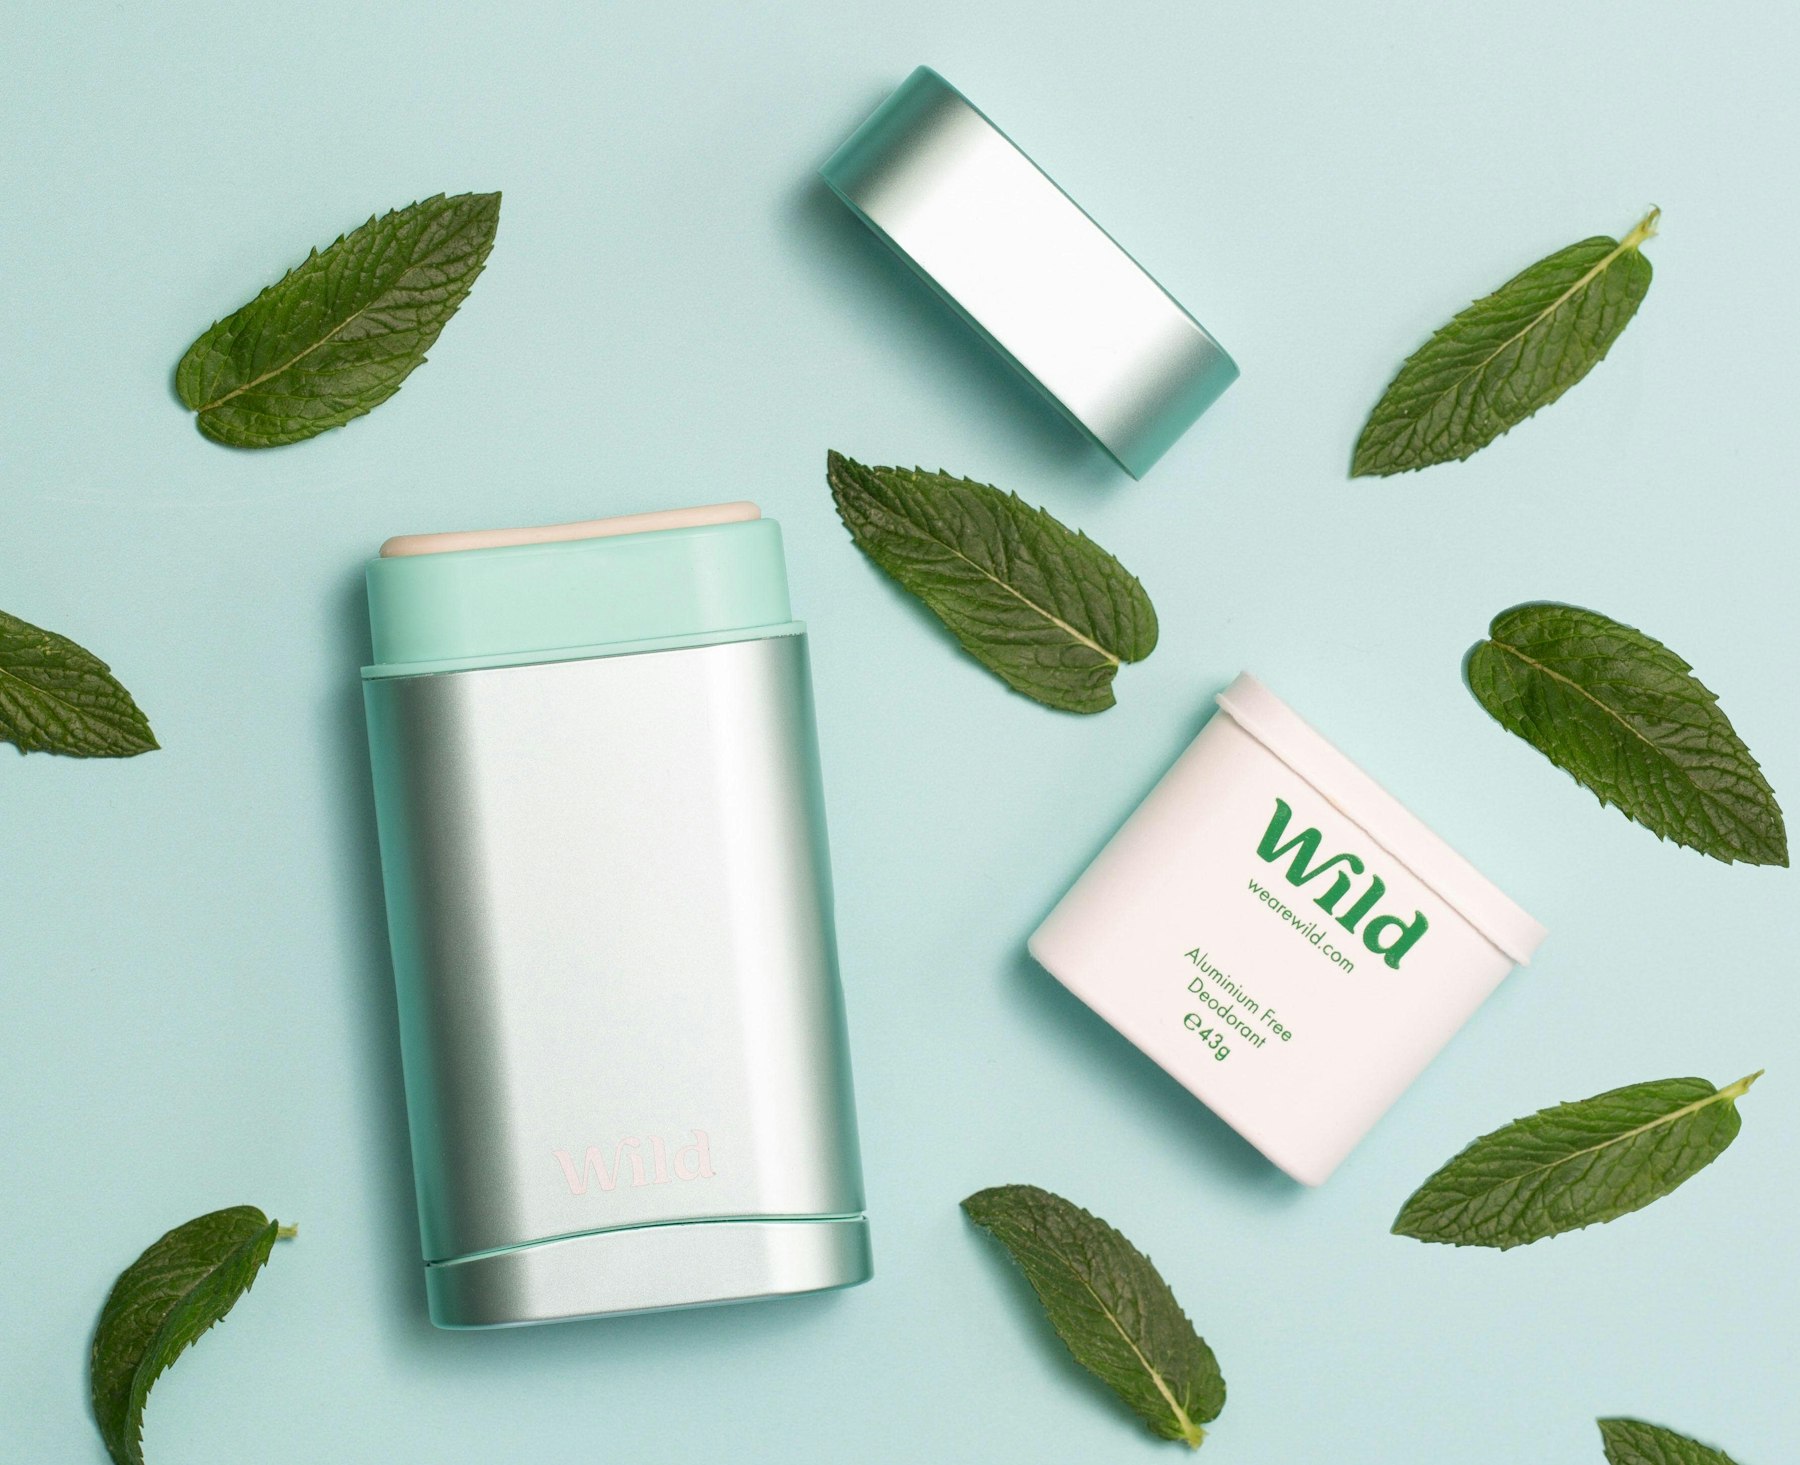 The world's first plastic-free deodorant refill is made of bamboo pulp -  Design Week